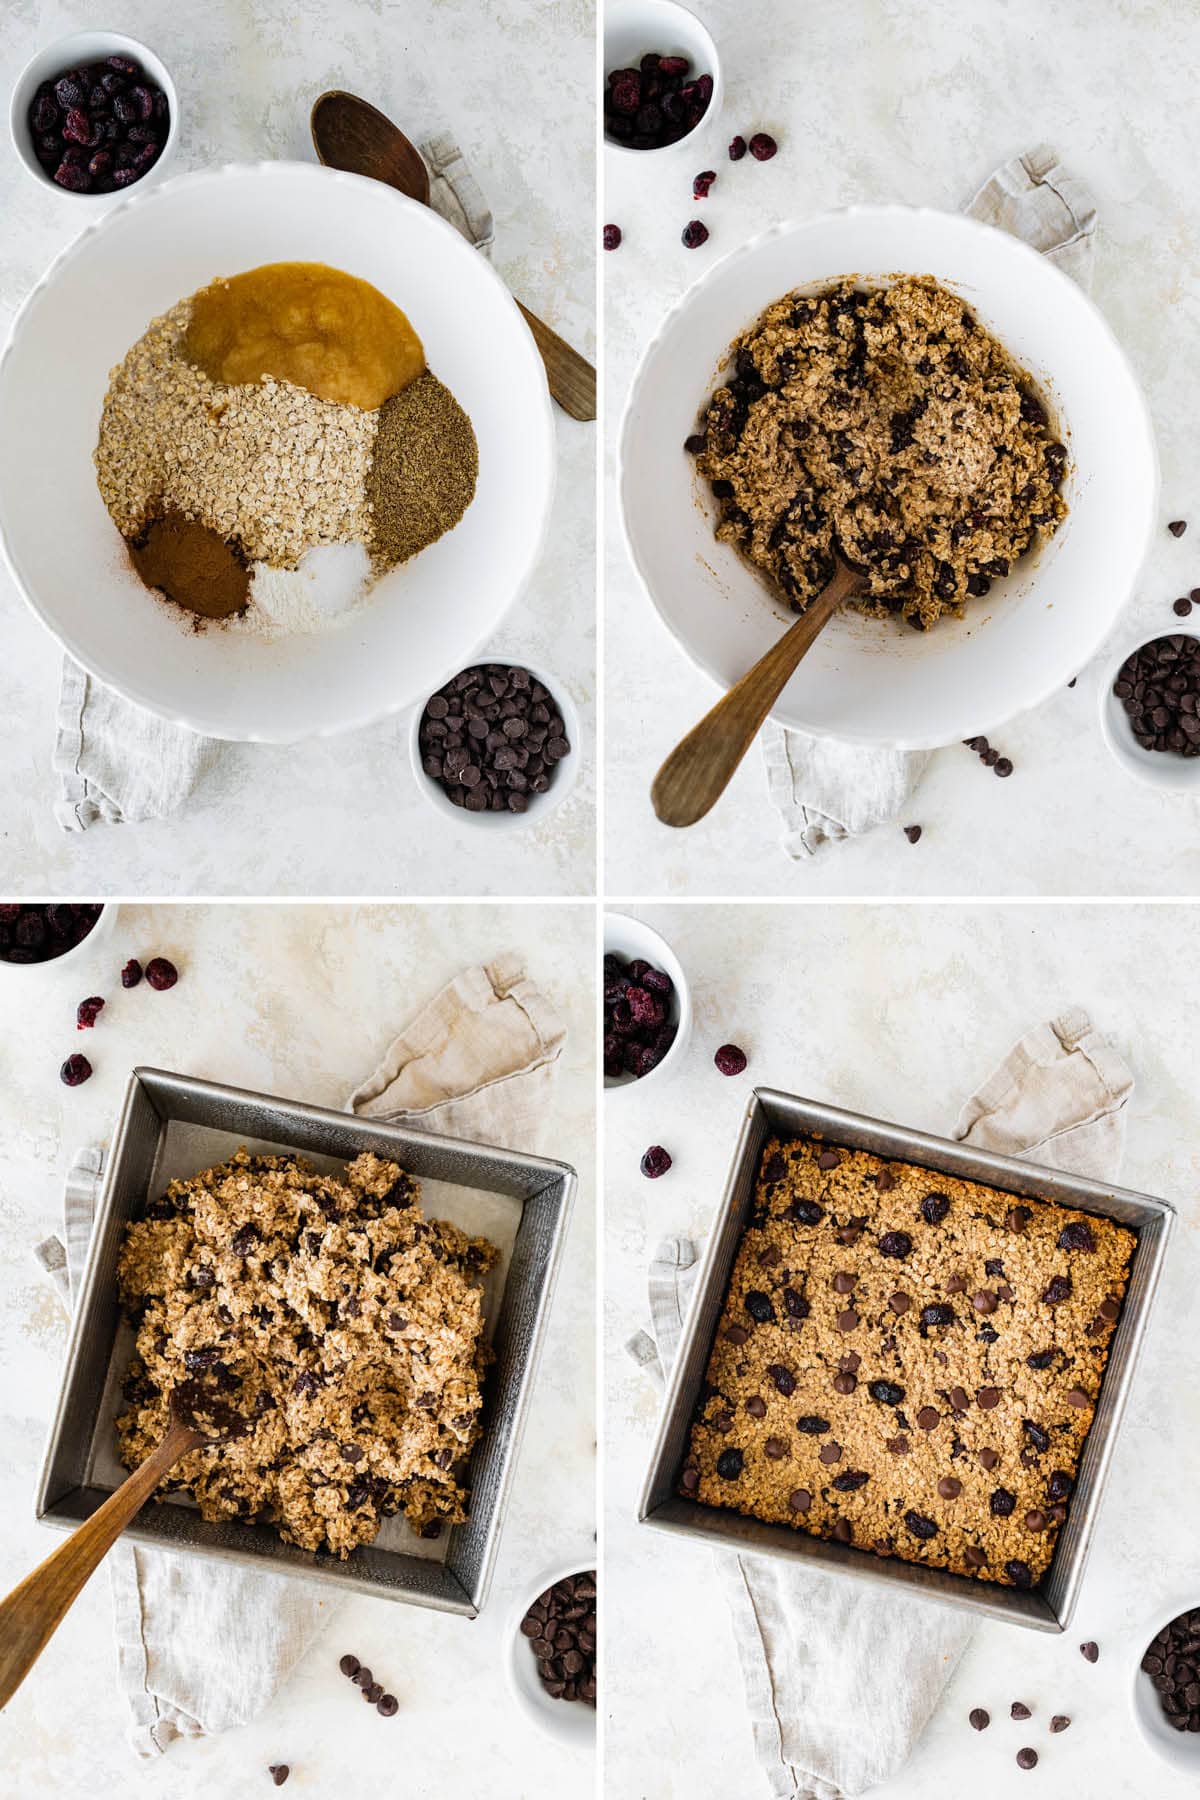 Collage of four photos showing how to make Oatmeal Breakfast Bars: mixing batter and then baking in a pan.